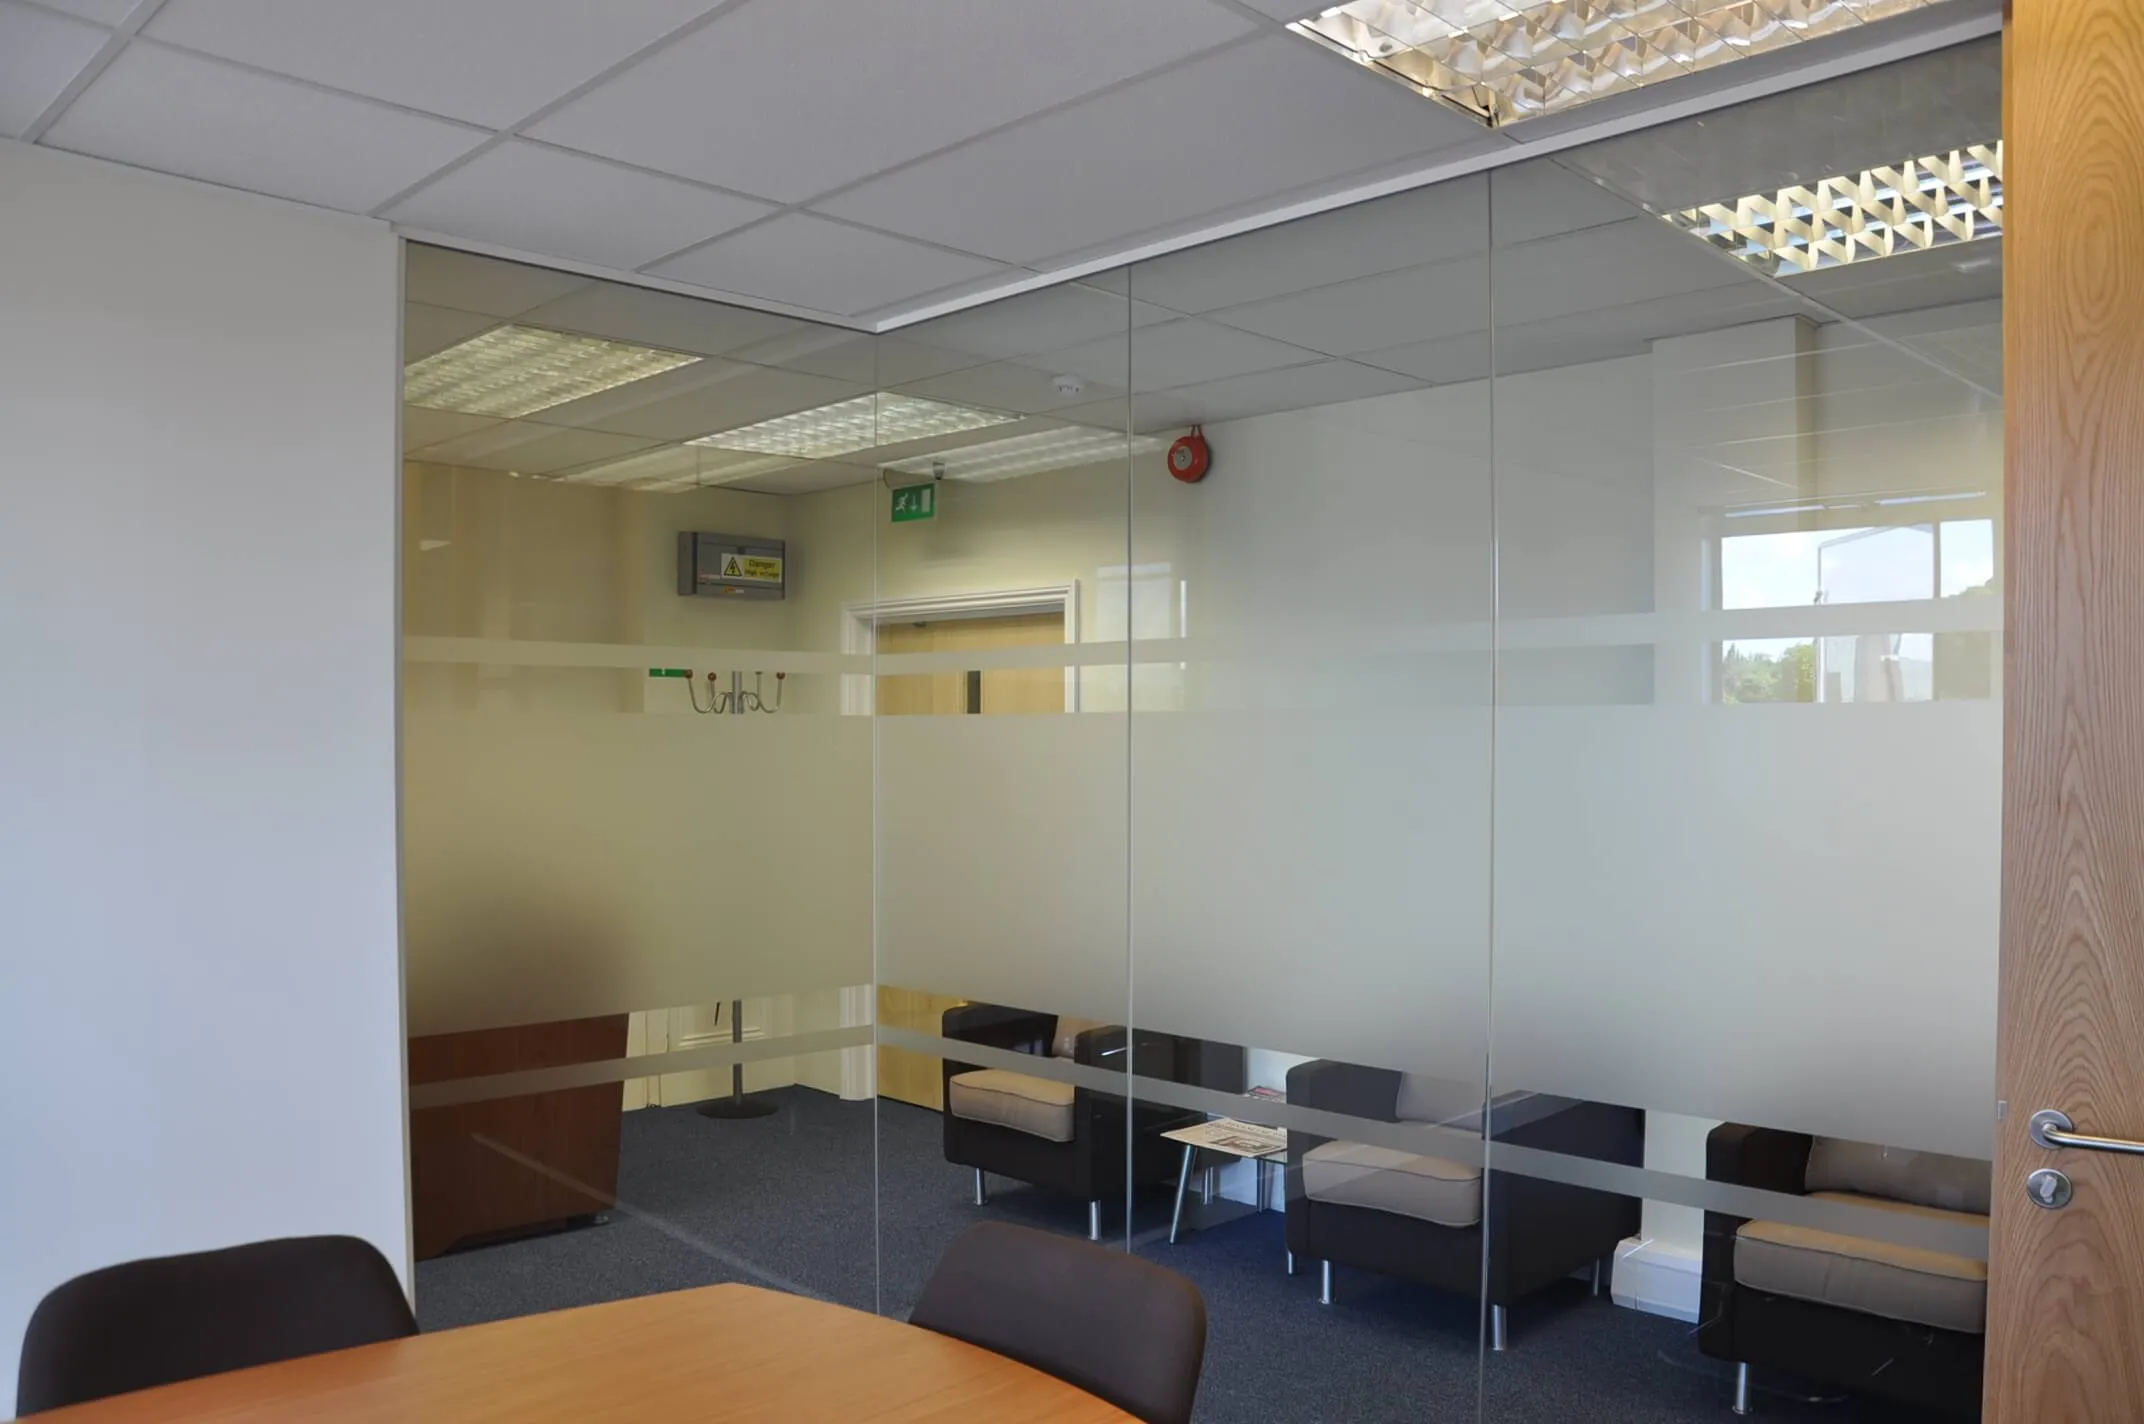 Office waiting space and meeting space divided with glass partitions